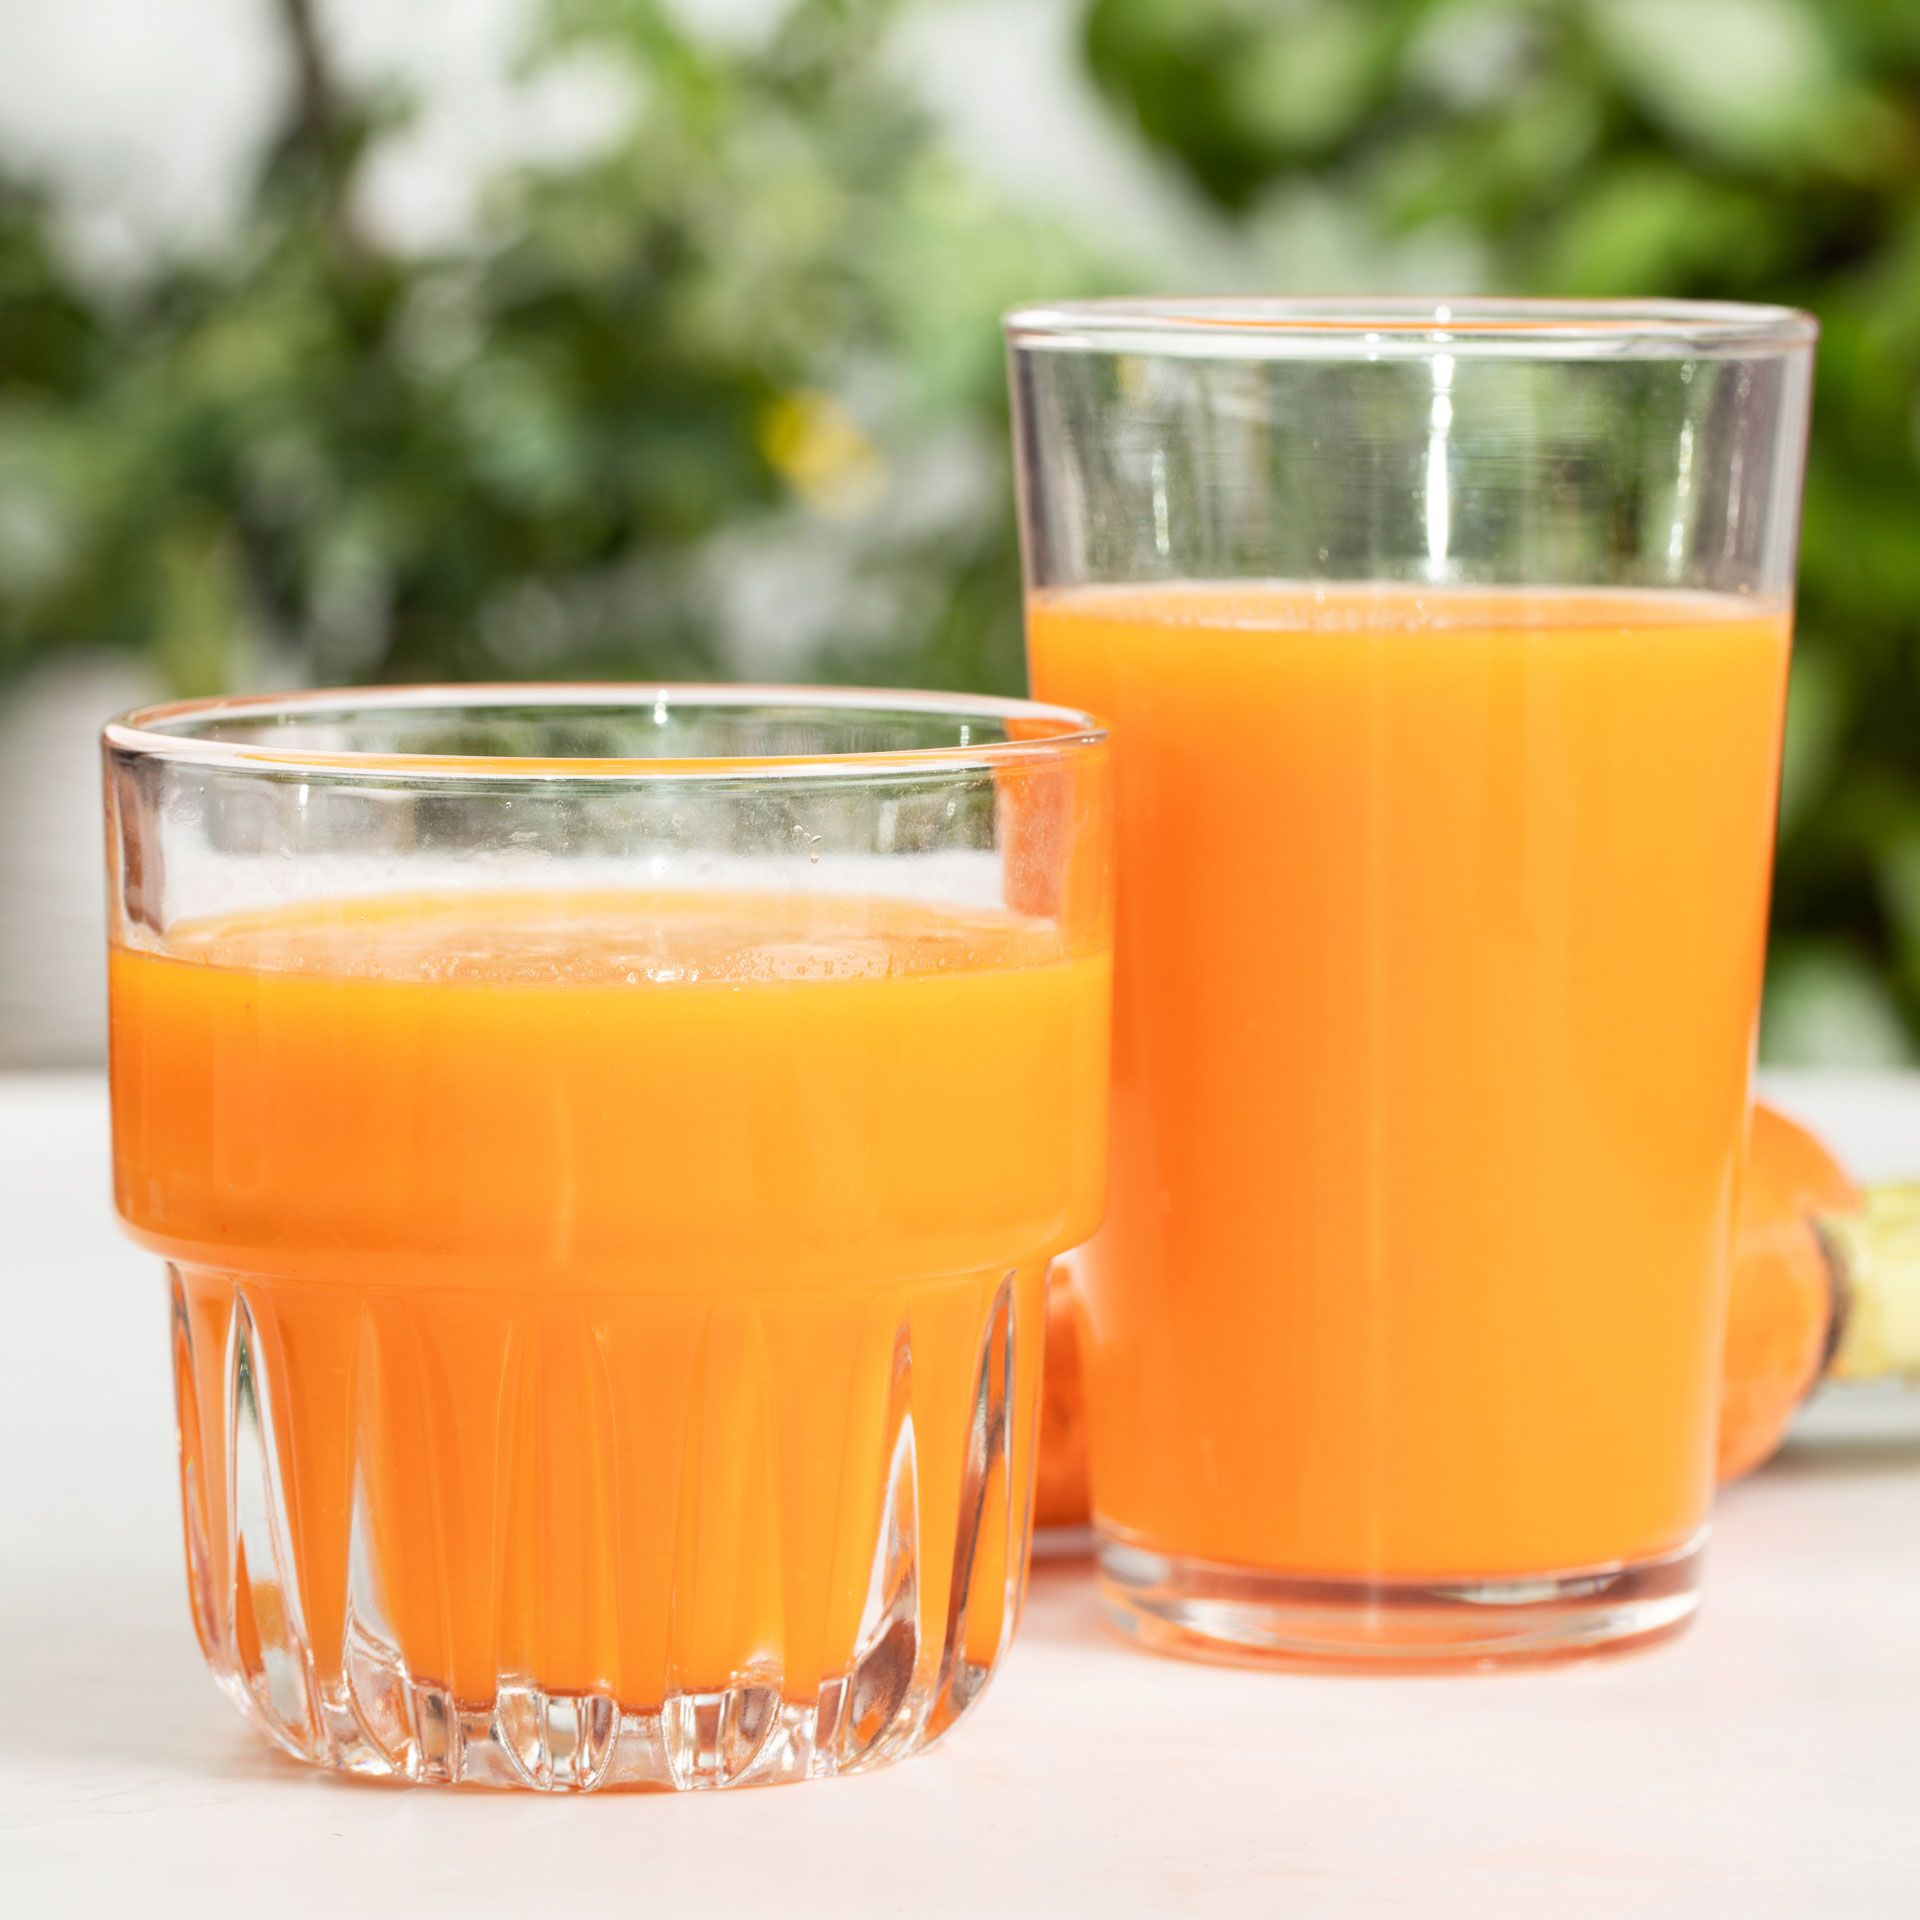 How Do You Make Carrot Juice With Milk From Tegal City